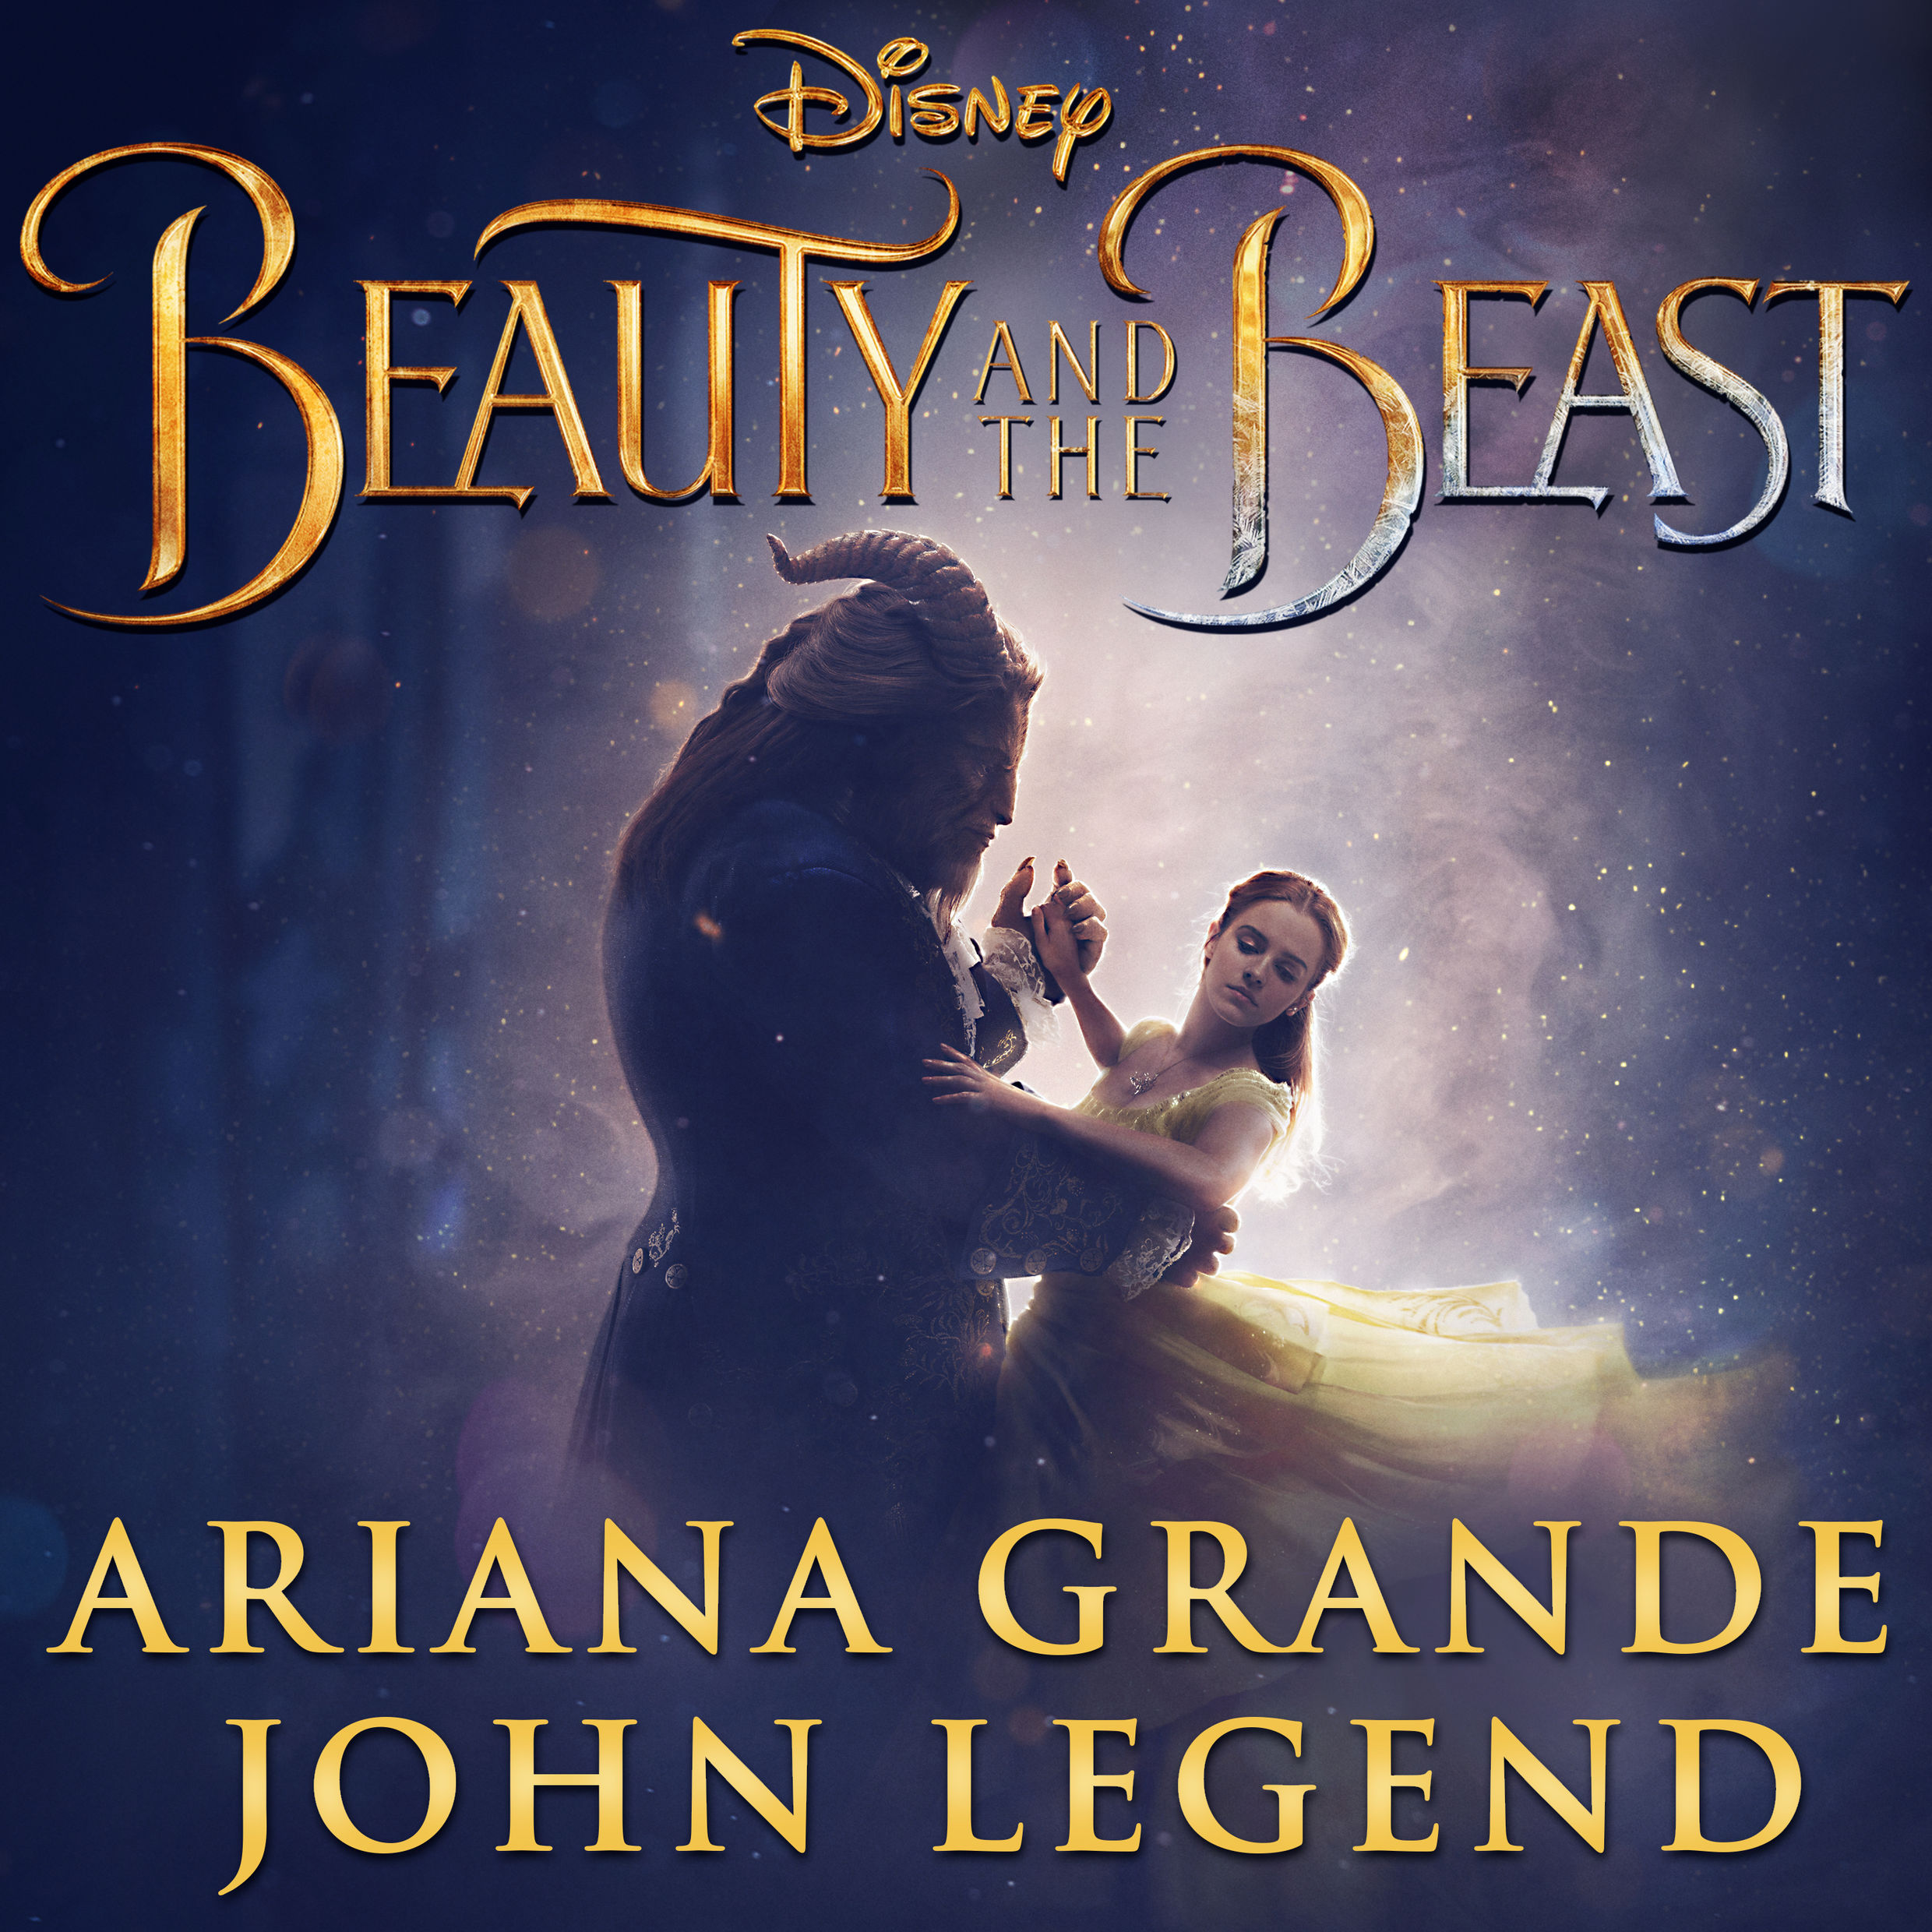 New Song Ariana Grande And John Legend Beauty And The Beast Full